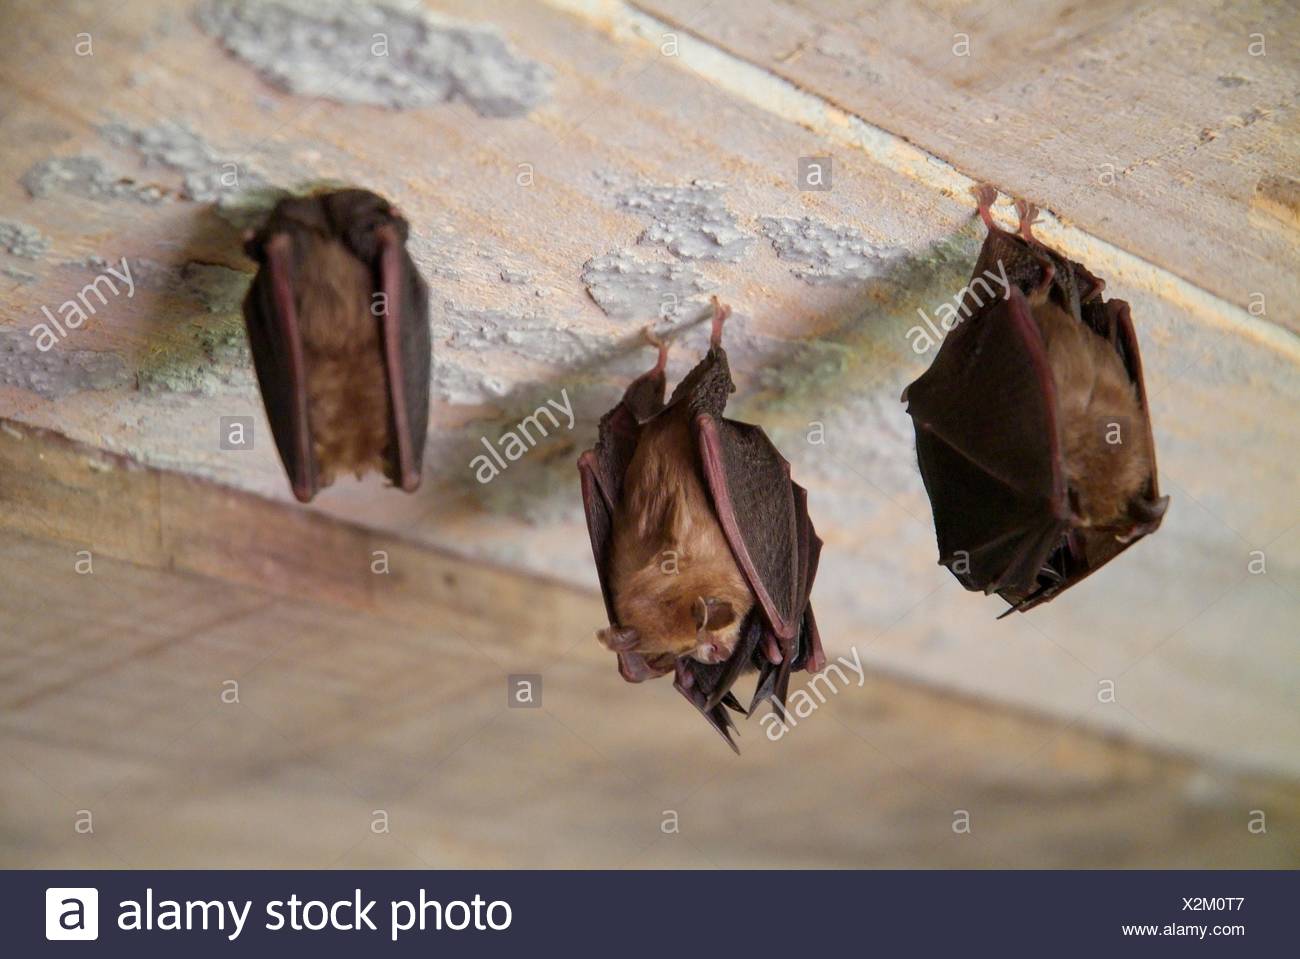 Bats Hanging High Resolution Stock Photography and Images - Alamy